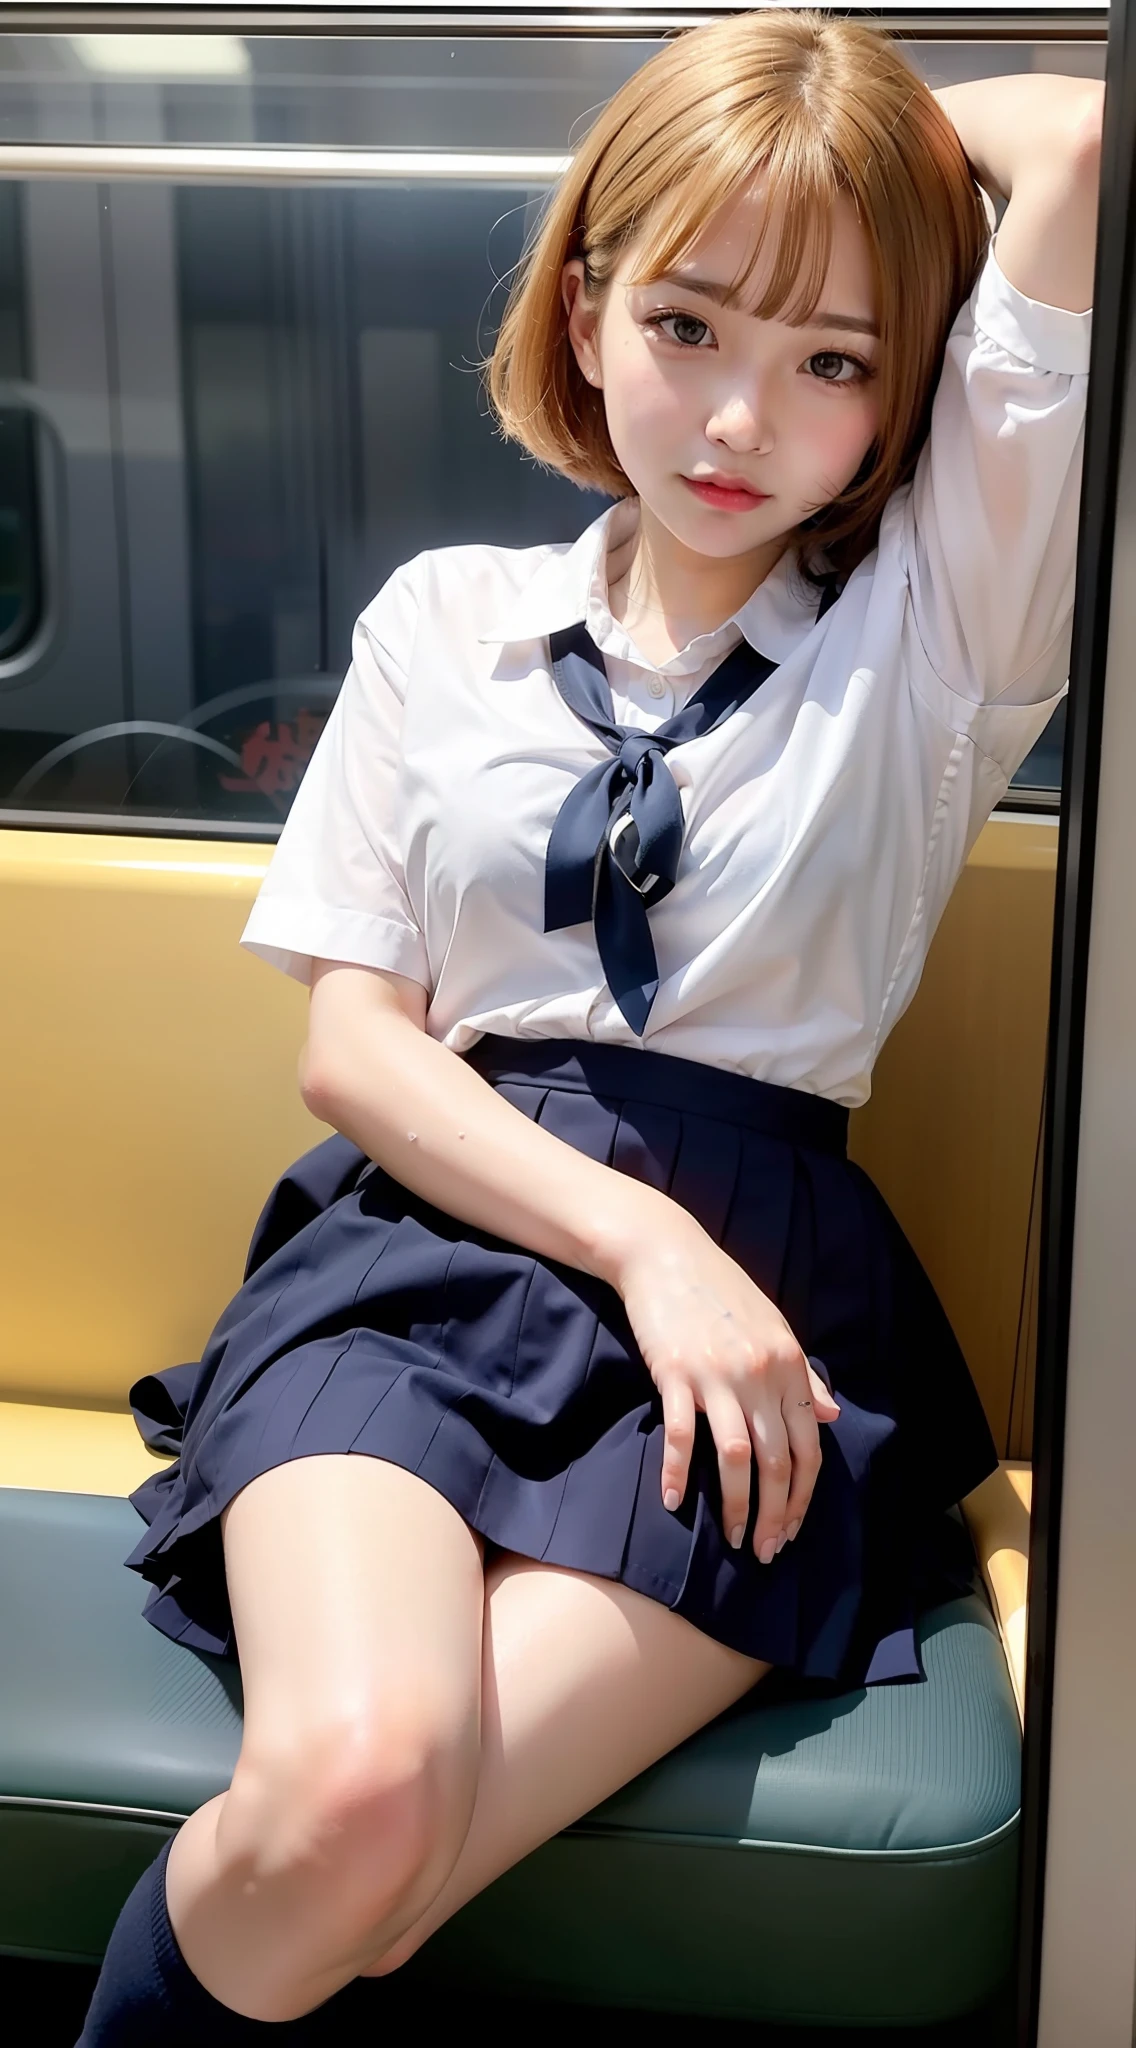 Japanese Girls、18 year old girl、ple short hair、Blond Hair、bangs、BROWN EYES、Perfect figure、Sense of transparency、luster、glosodest chest、School Uniforms、Navy blue ribbon、Light blue shirt、Navy blue skirt、Guangyue、Burning body、hposing Gravure Idol、On the train、Beautiful feet、Strong sunlight、Nasty、Rain-drenched body、wet